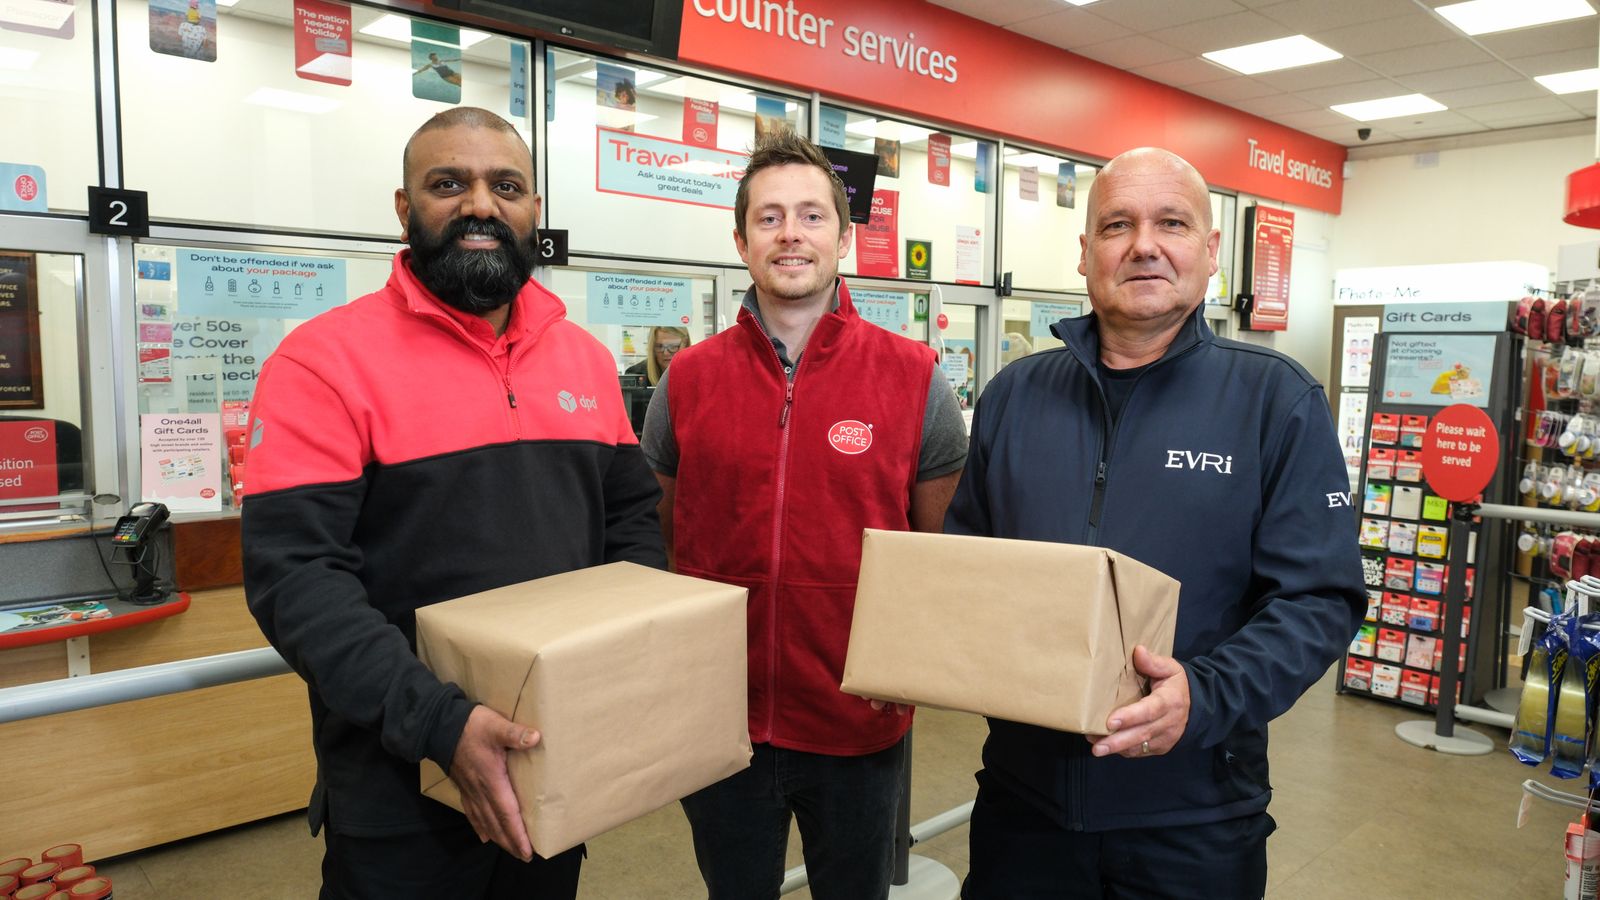 Post Office to offer DPD and Evri parcel delivery options to customers